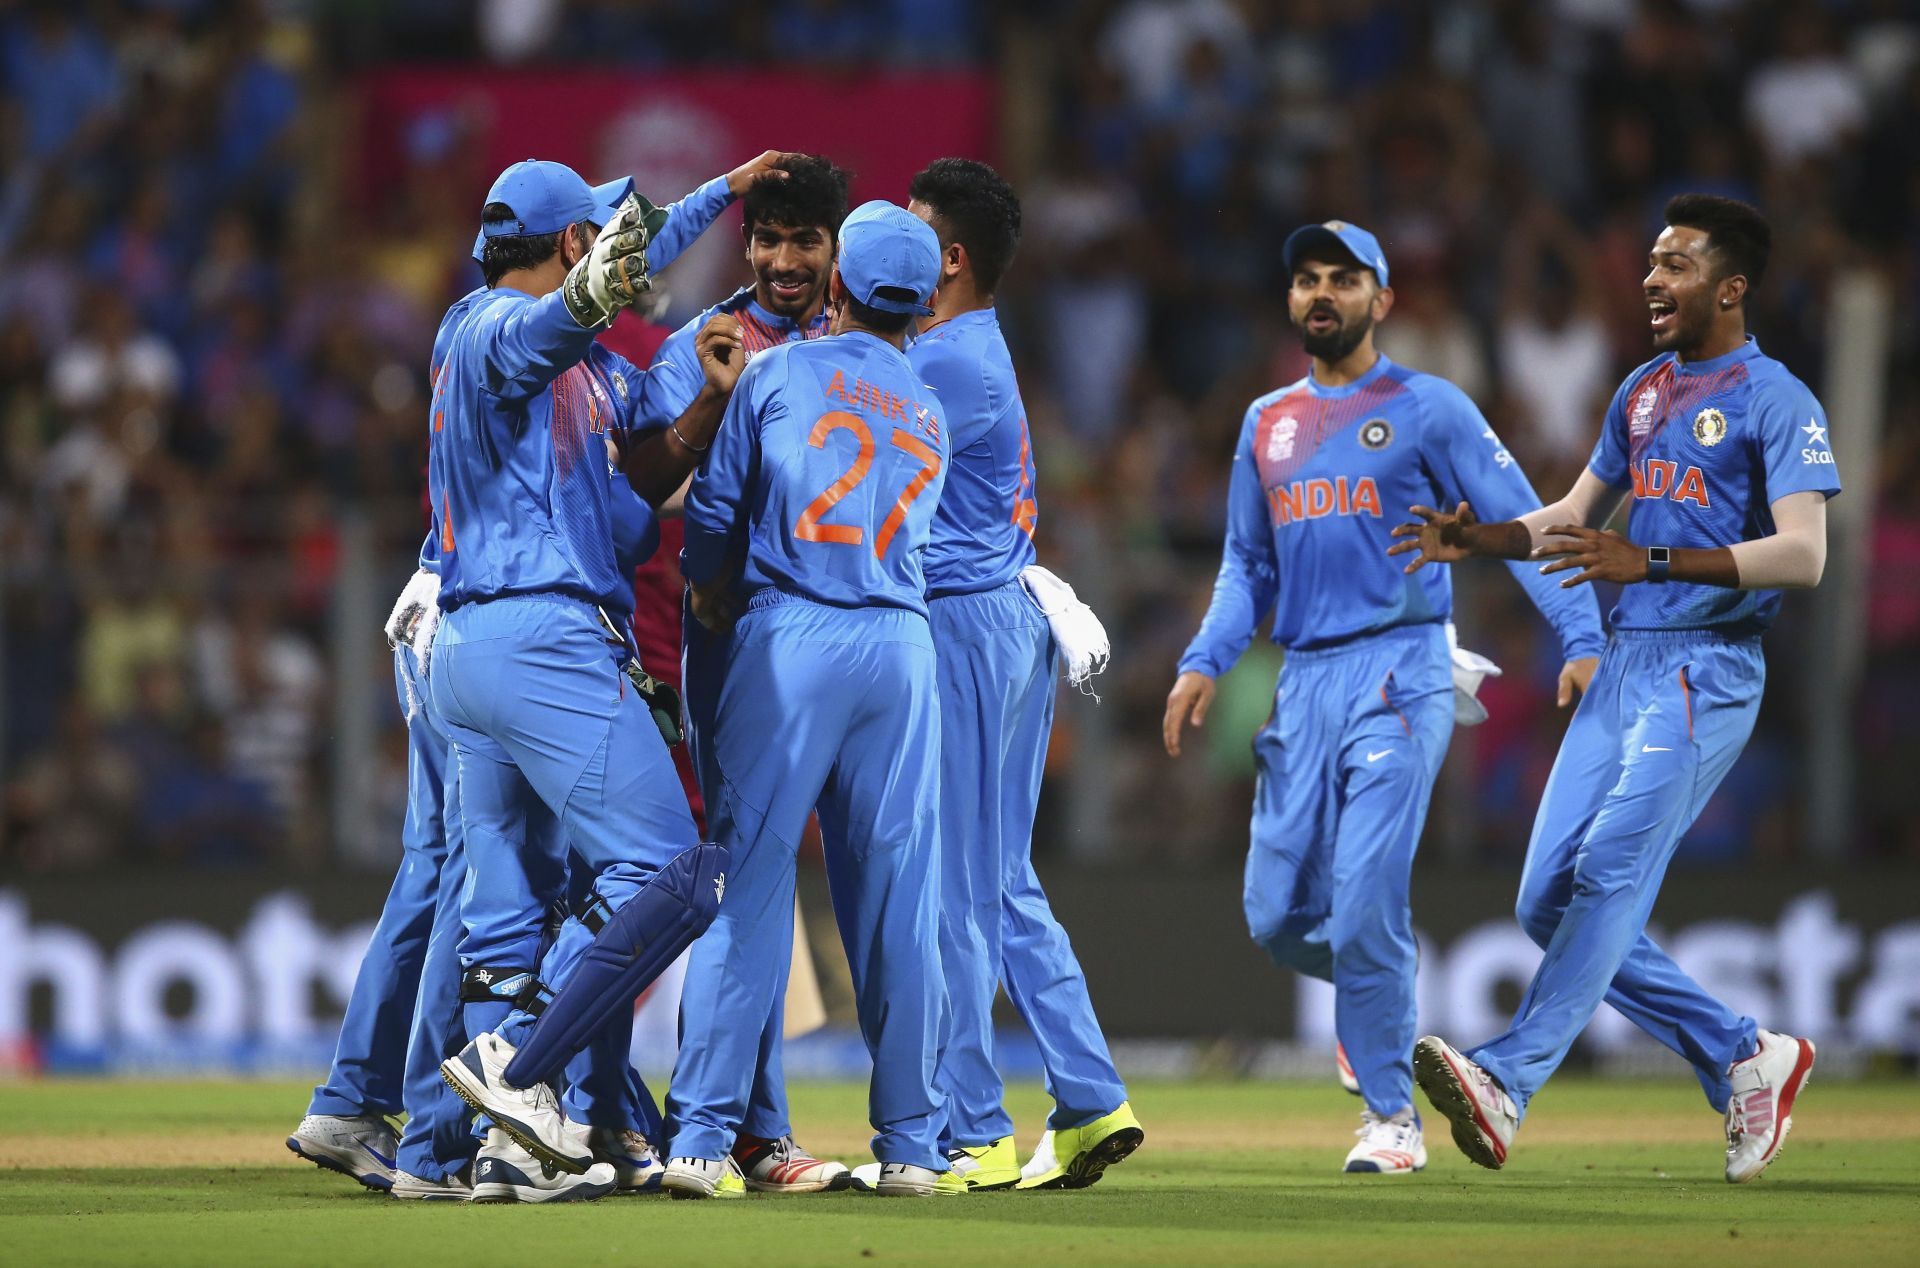 India lost their previous T20 World Cup match to the West Indies